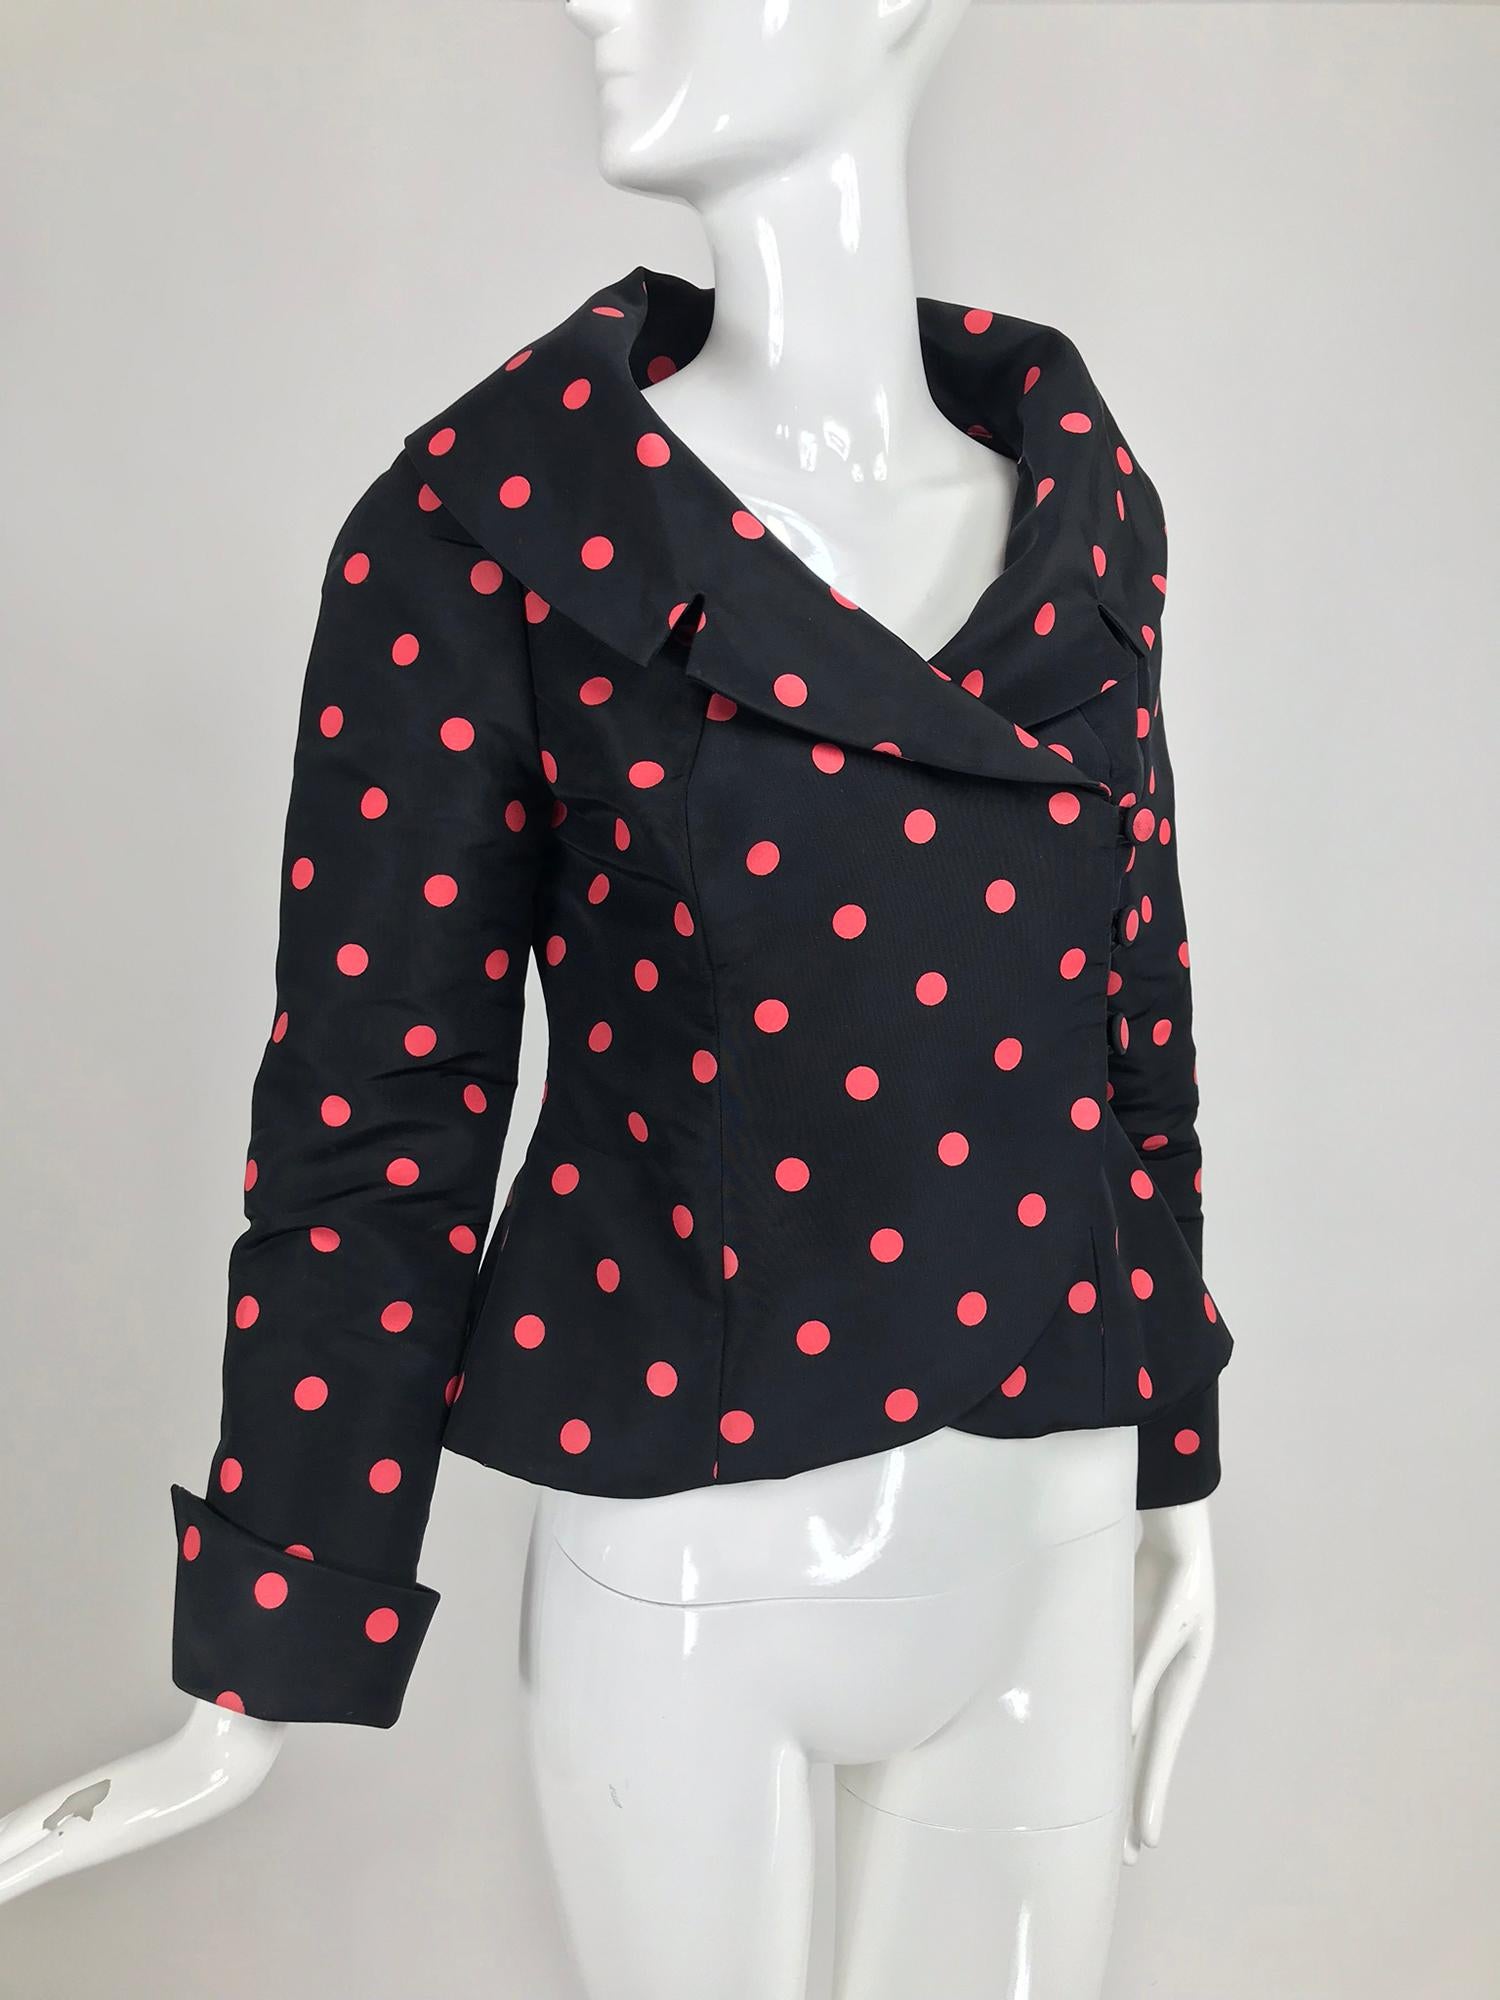 Tosca Couture black and red dot silk taffeta jacket. Portrait neckline with notched lapels, princess seam jacket is fitted through the waist and flares at the hip. The jacket buttons at the front side with buttons and loops. The jacket has long